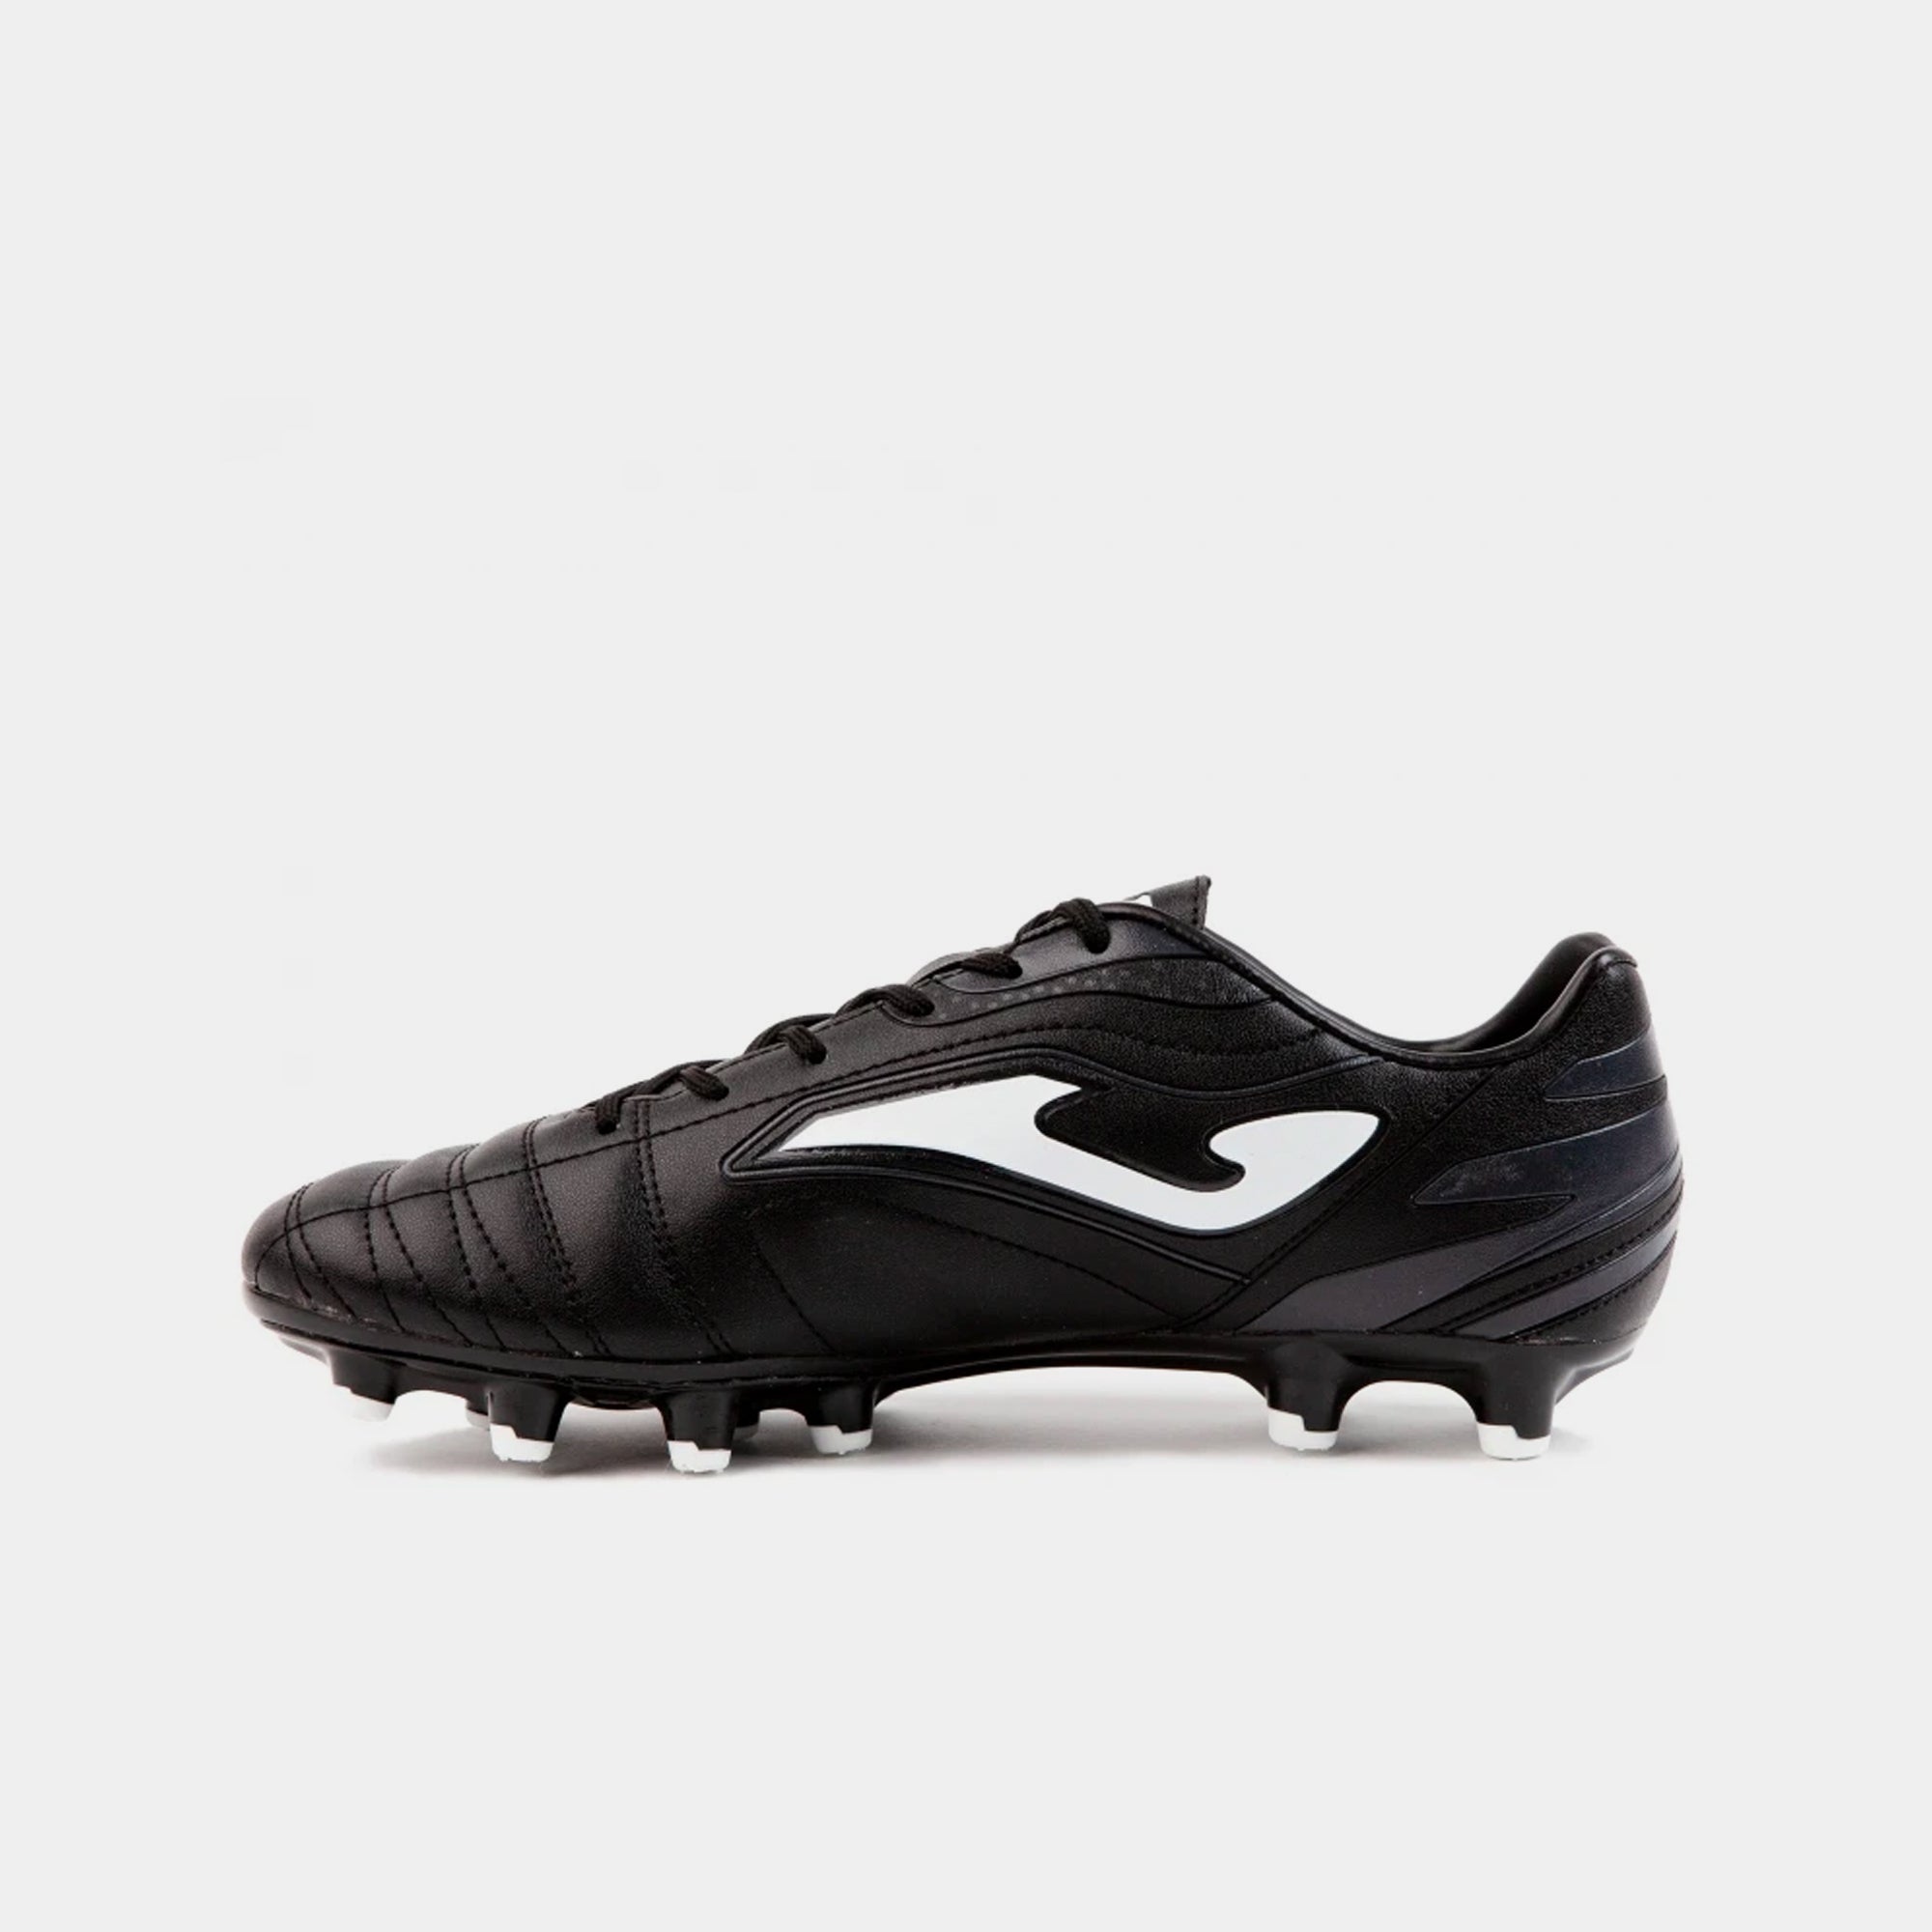 Aguila 801 Firmground Soccer Shoes